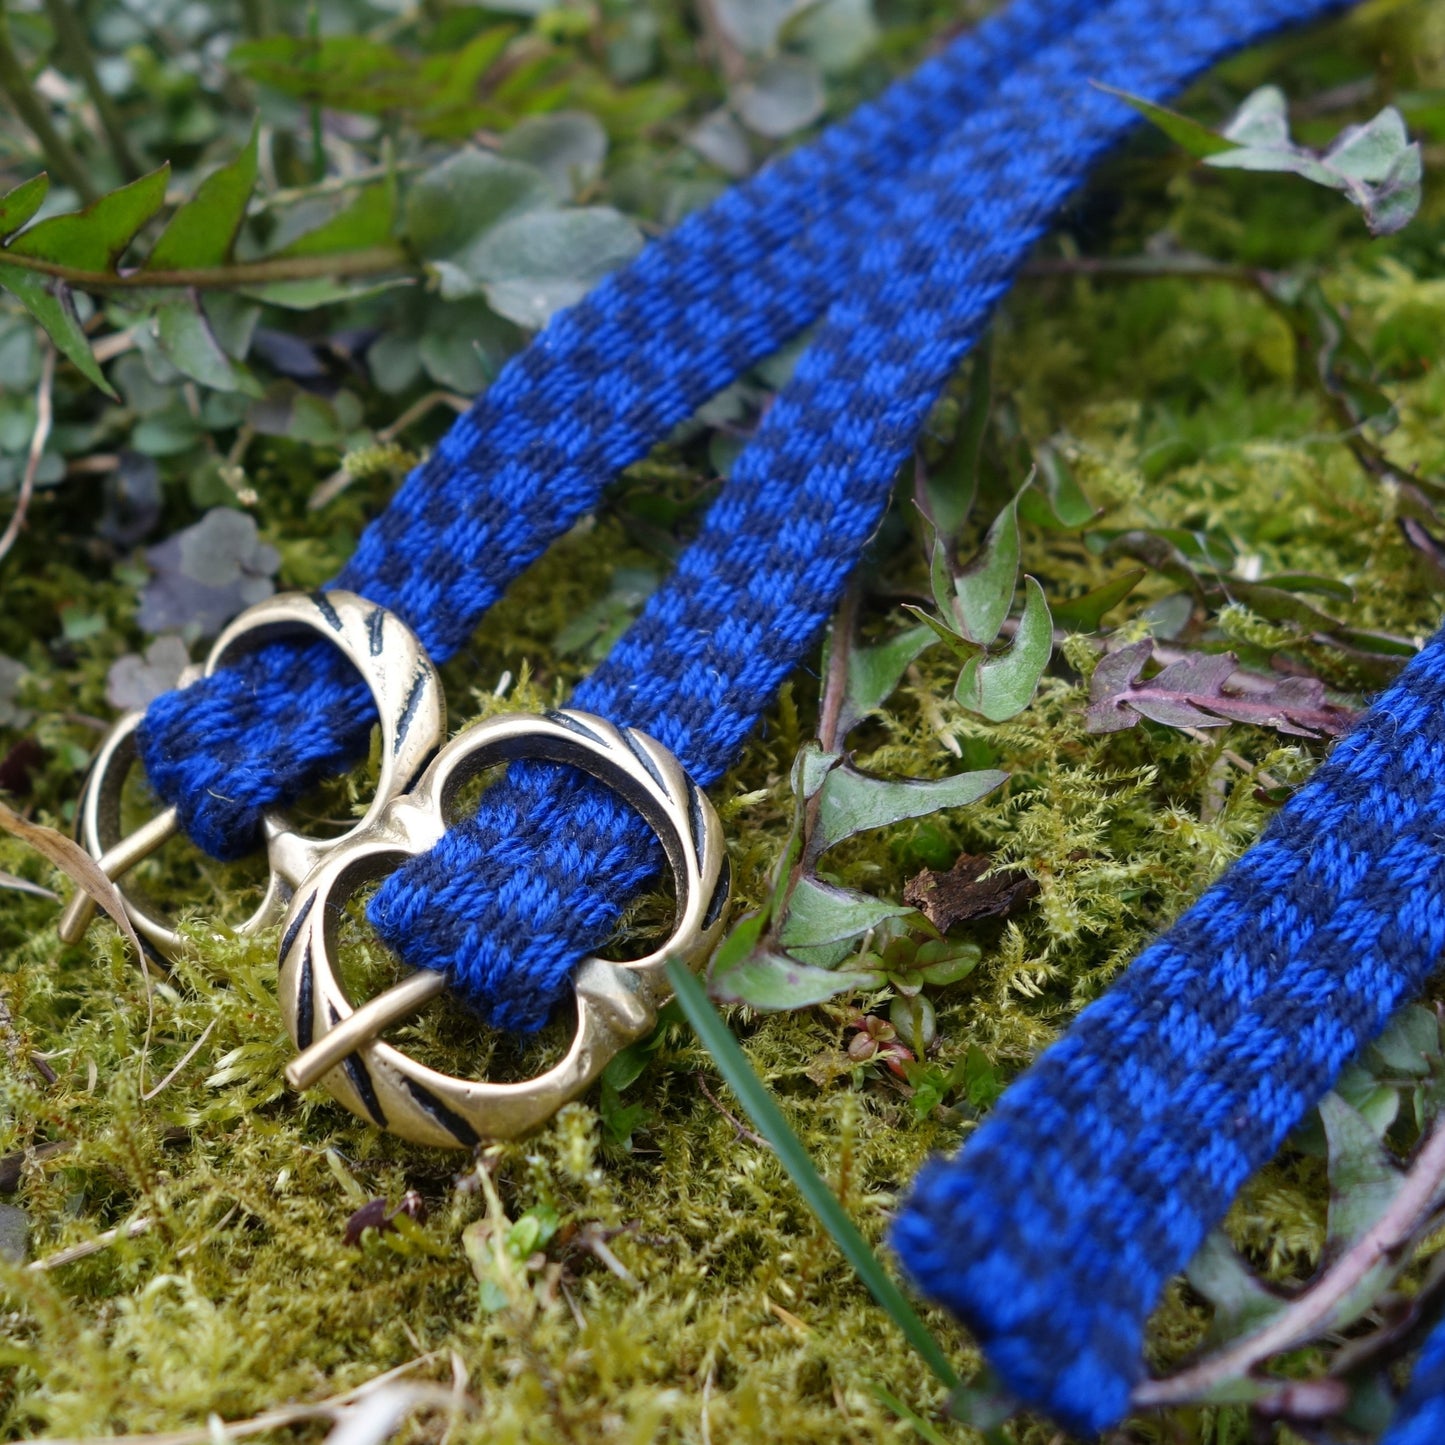 Pair of dark blue garters with checkboard pattern (14th-17th century)